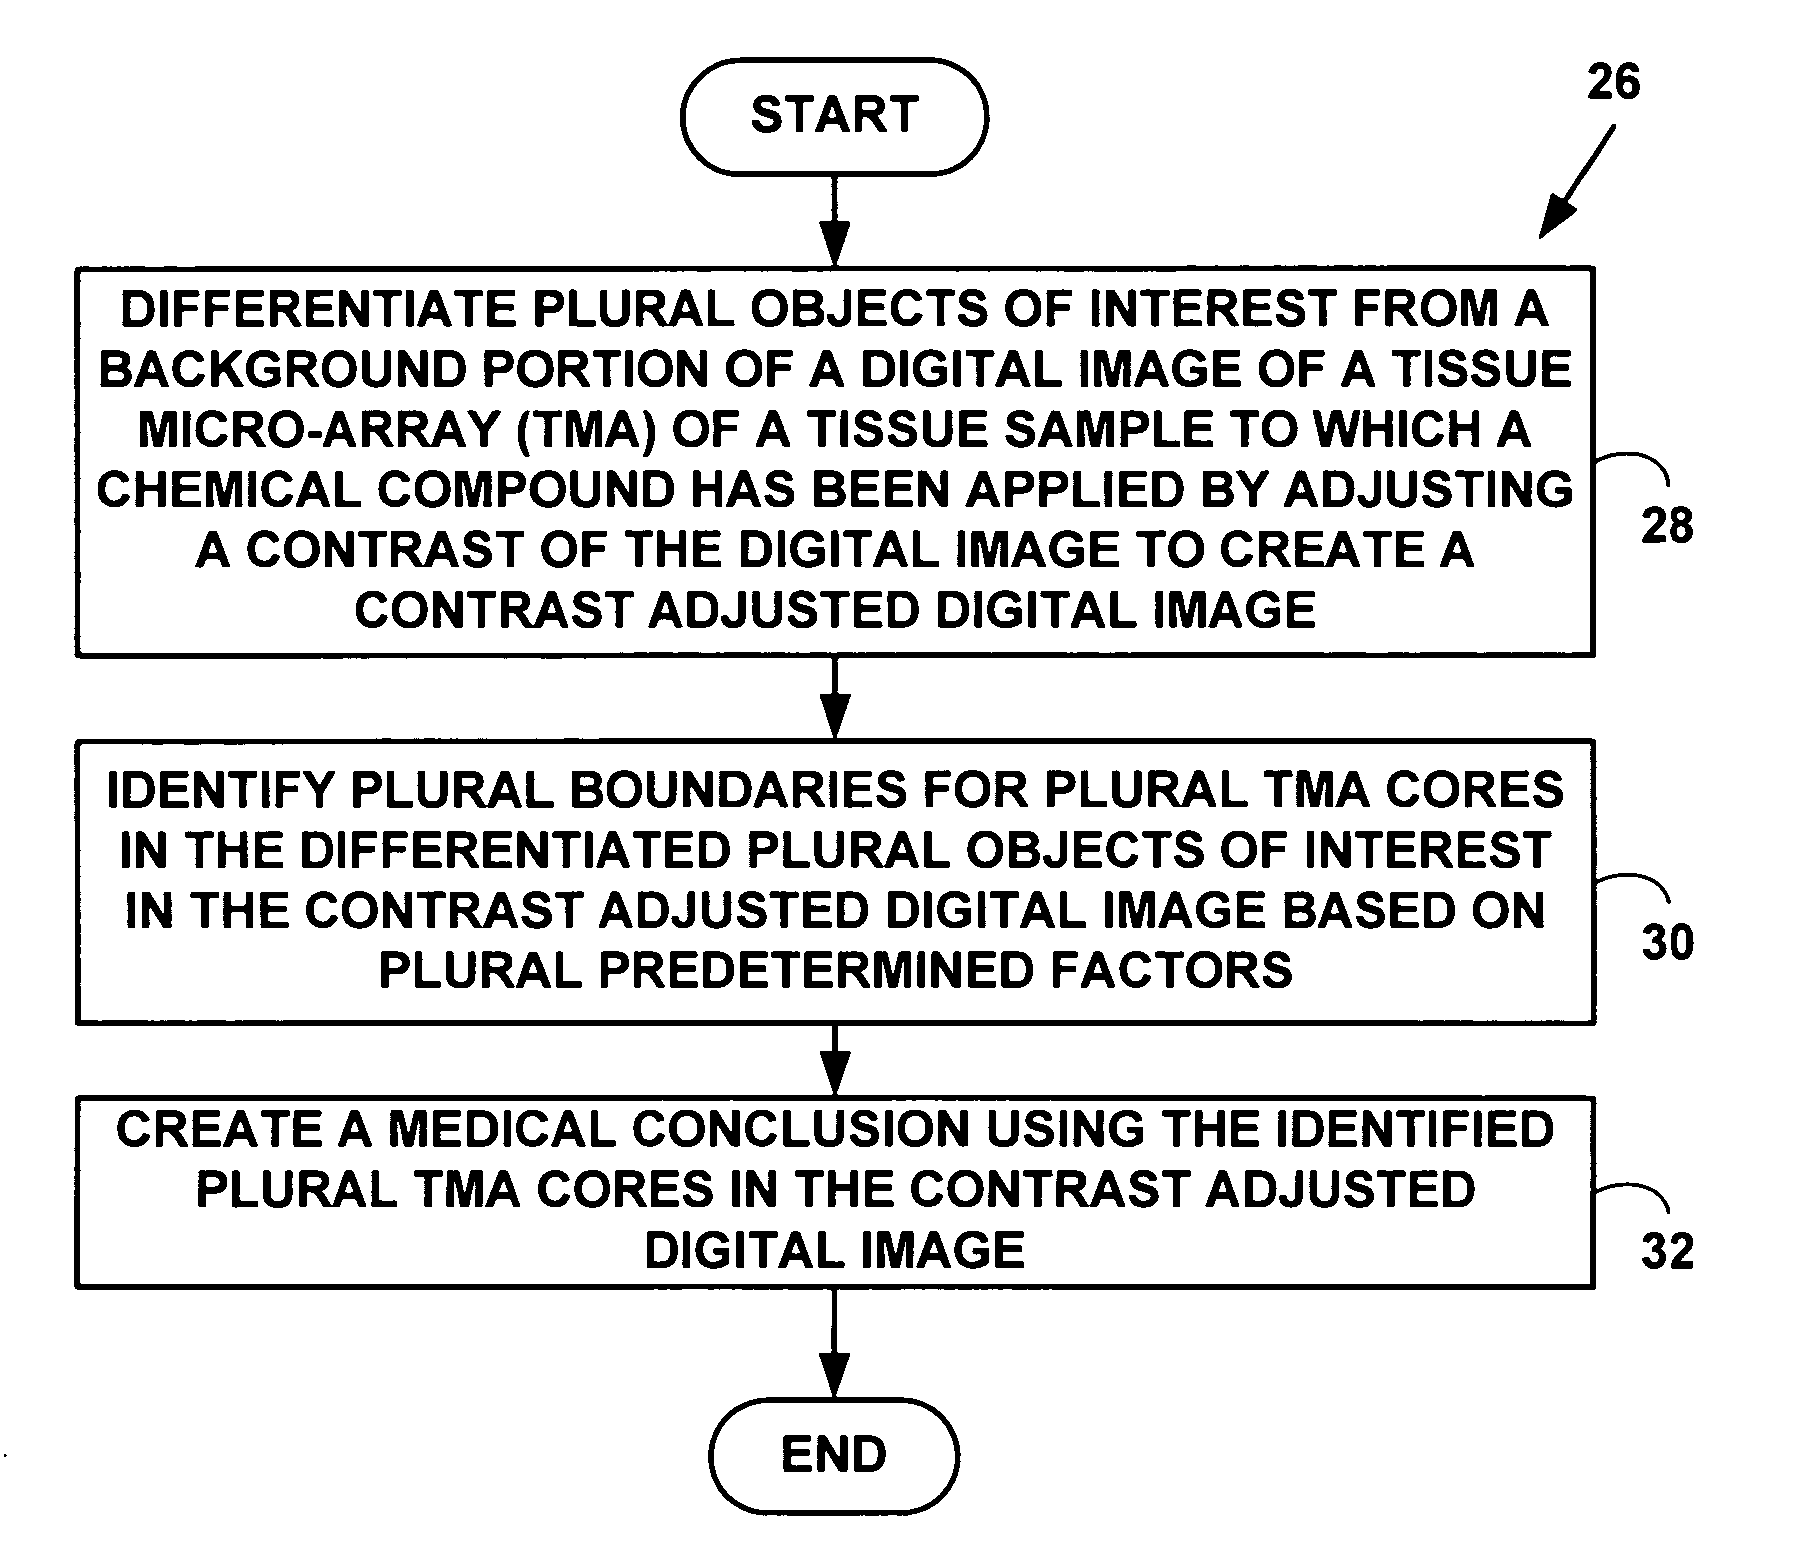 Method and system for automated quantitation of tissue micro-array (TMA) digital image analysis